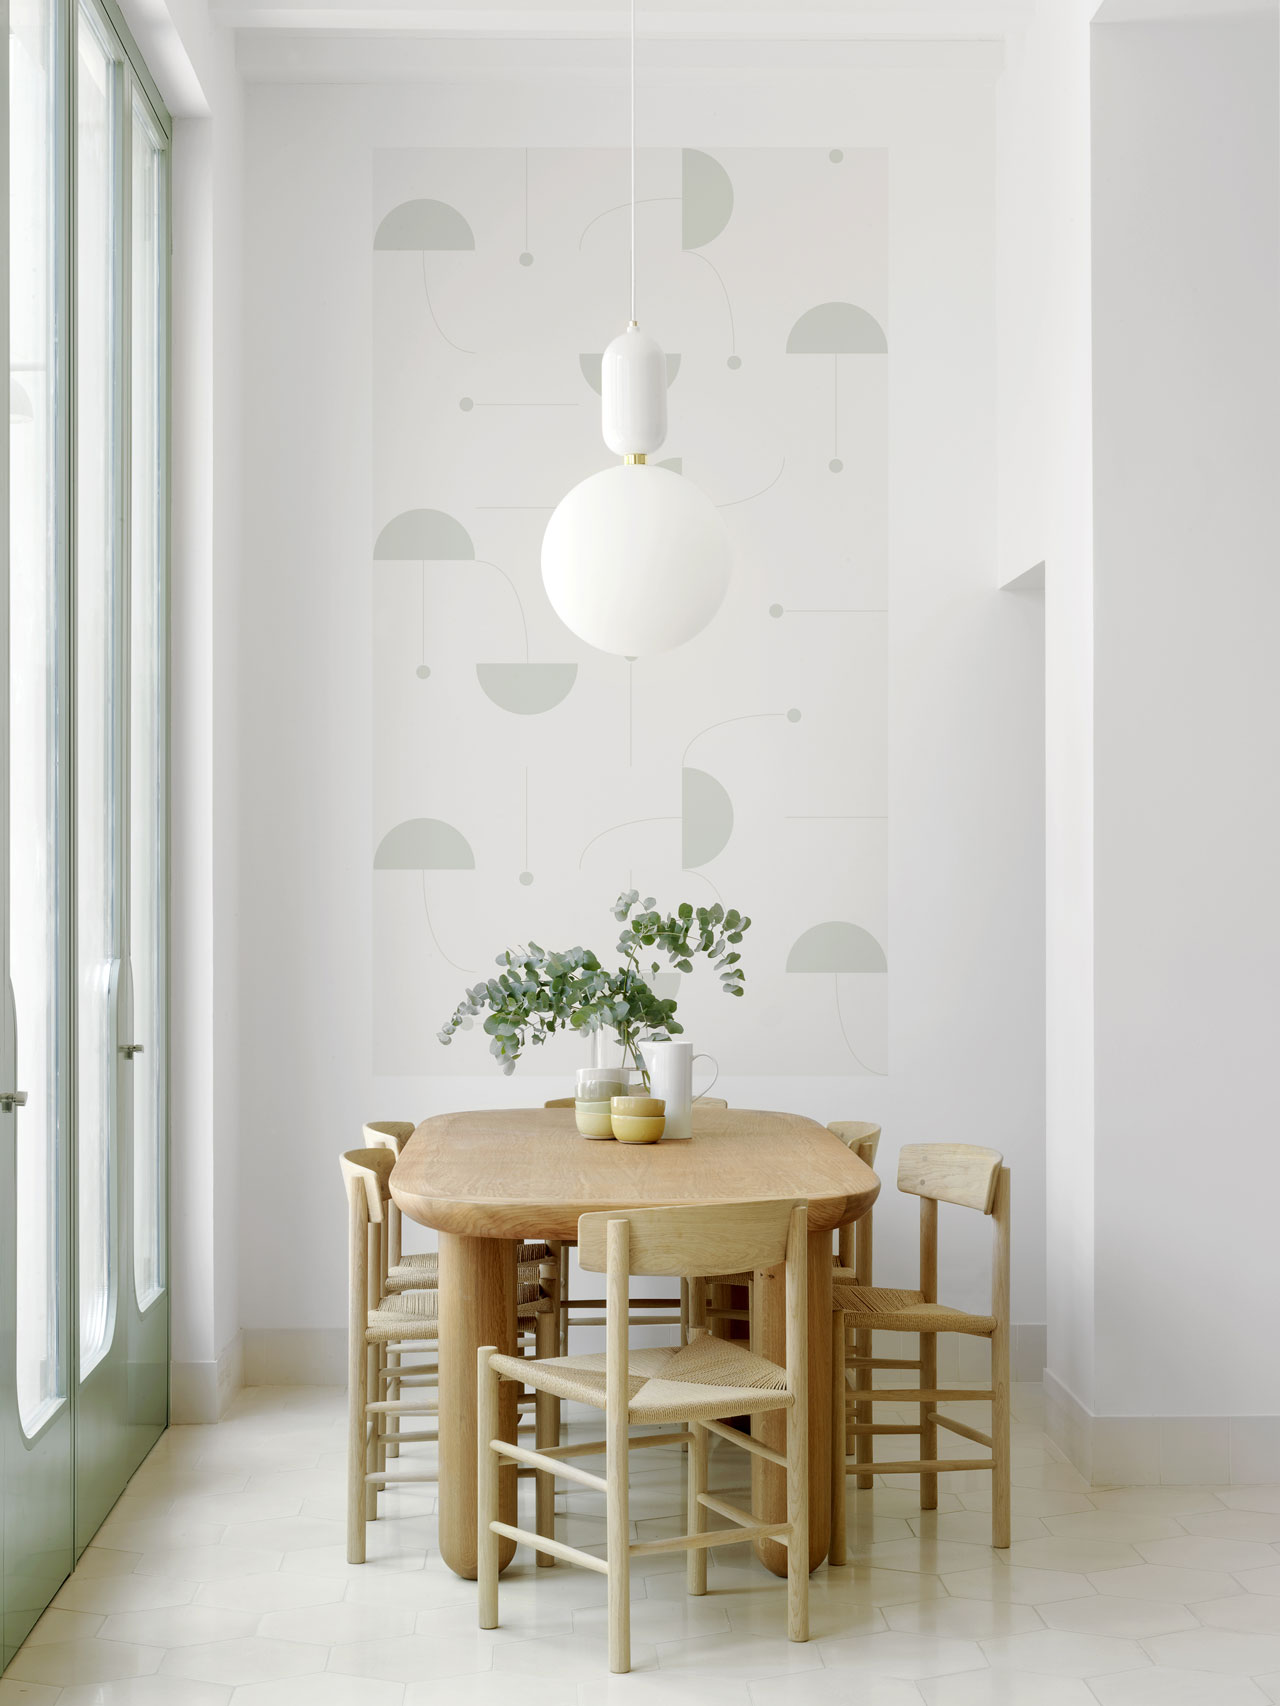 The latest collection from Eco Wallpaper features patterns created by the Spanish designer Jaime Hayon.